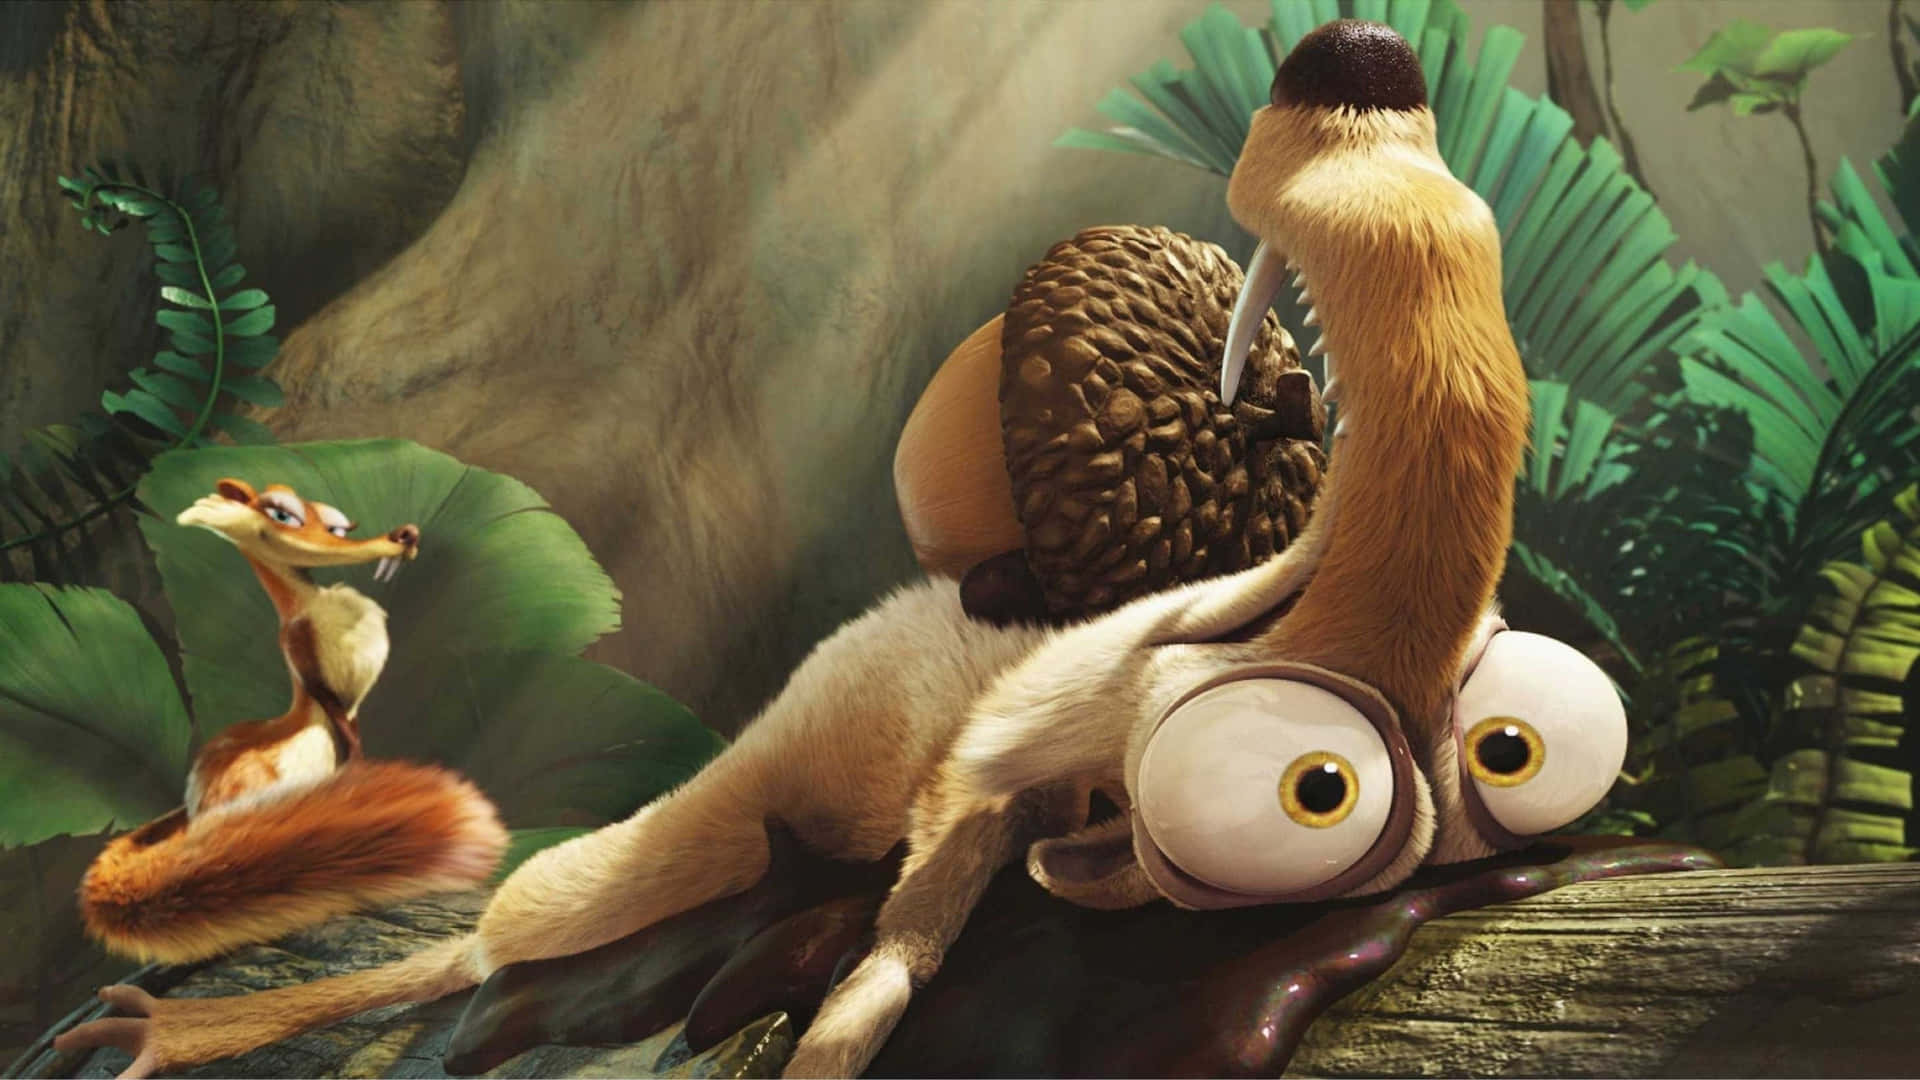 Bored Scrat With Acorn On Ice Age Dawn Of The Dinosaurs Wallpaper